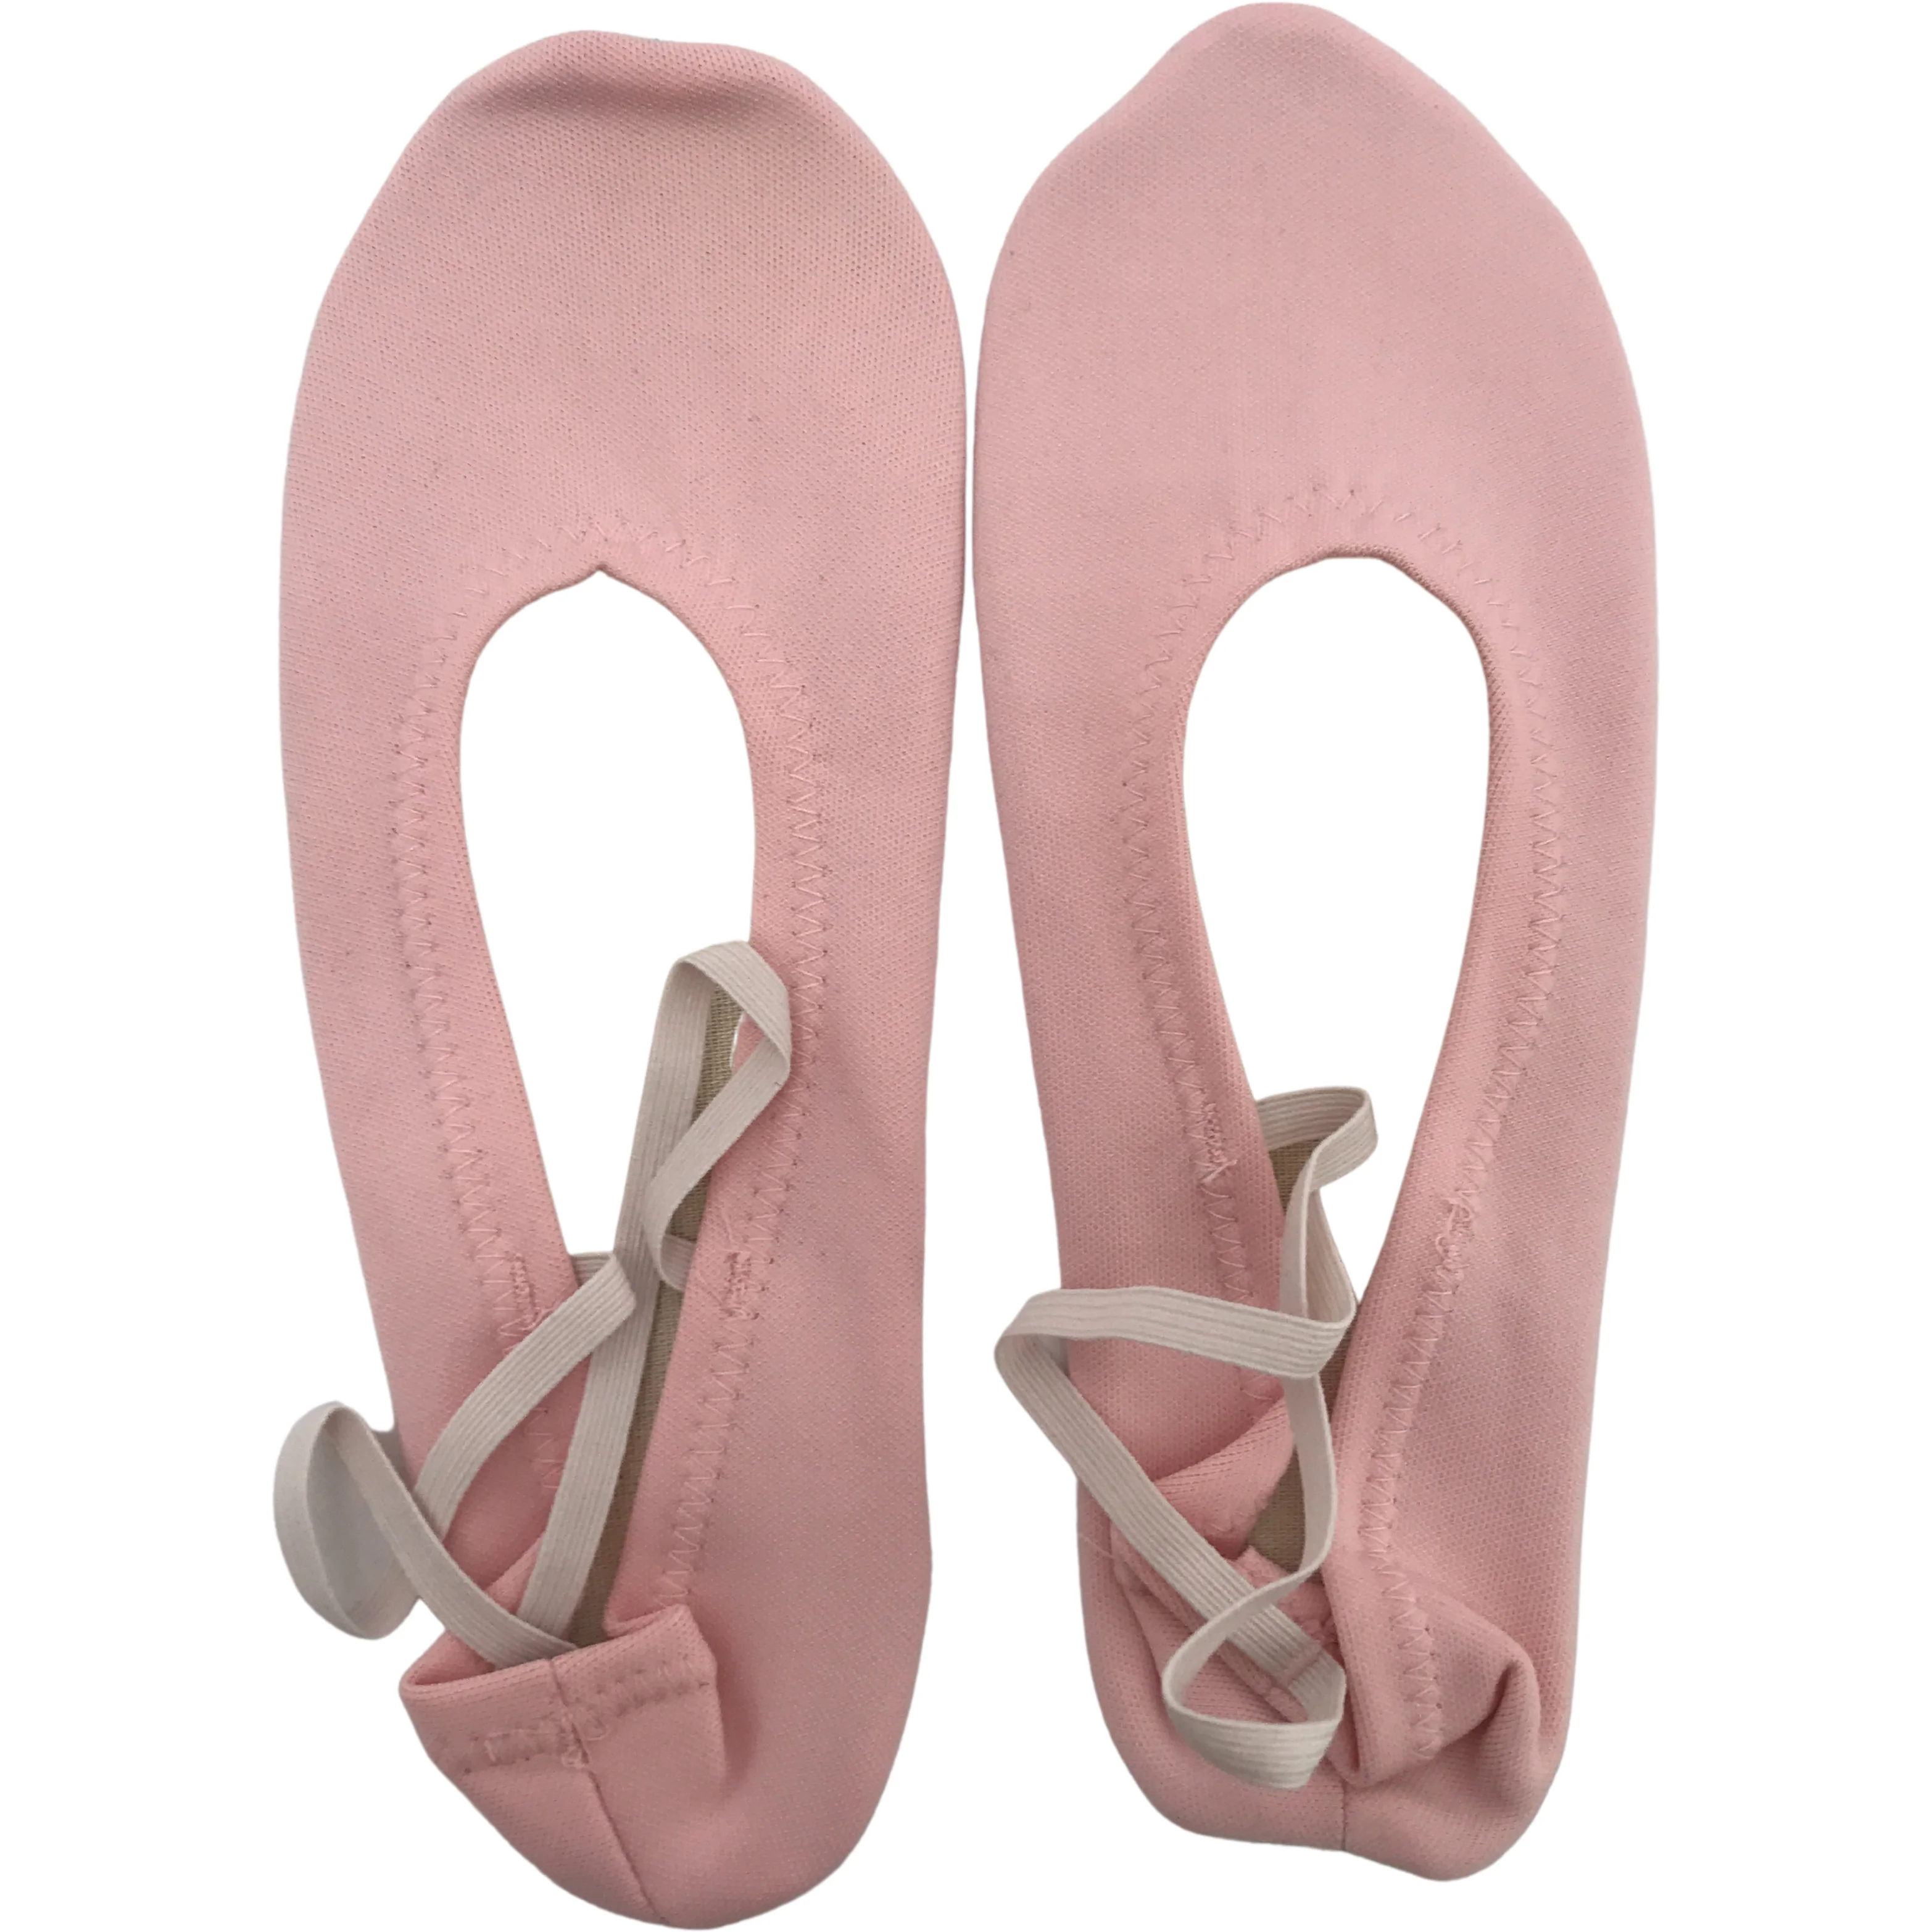 Johnny Brown Girl Ballet Slippers / Gym Slippers / Pink / Various Sizes